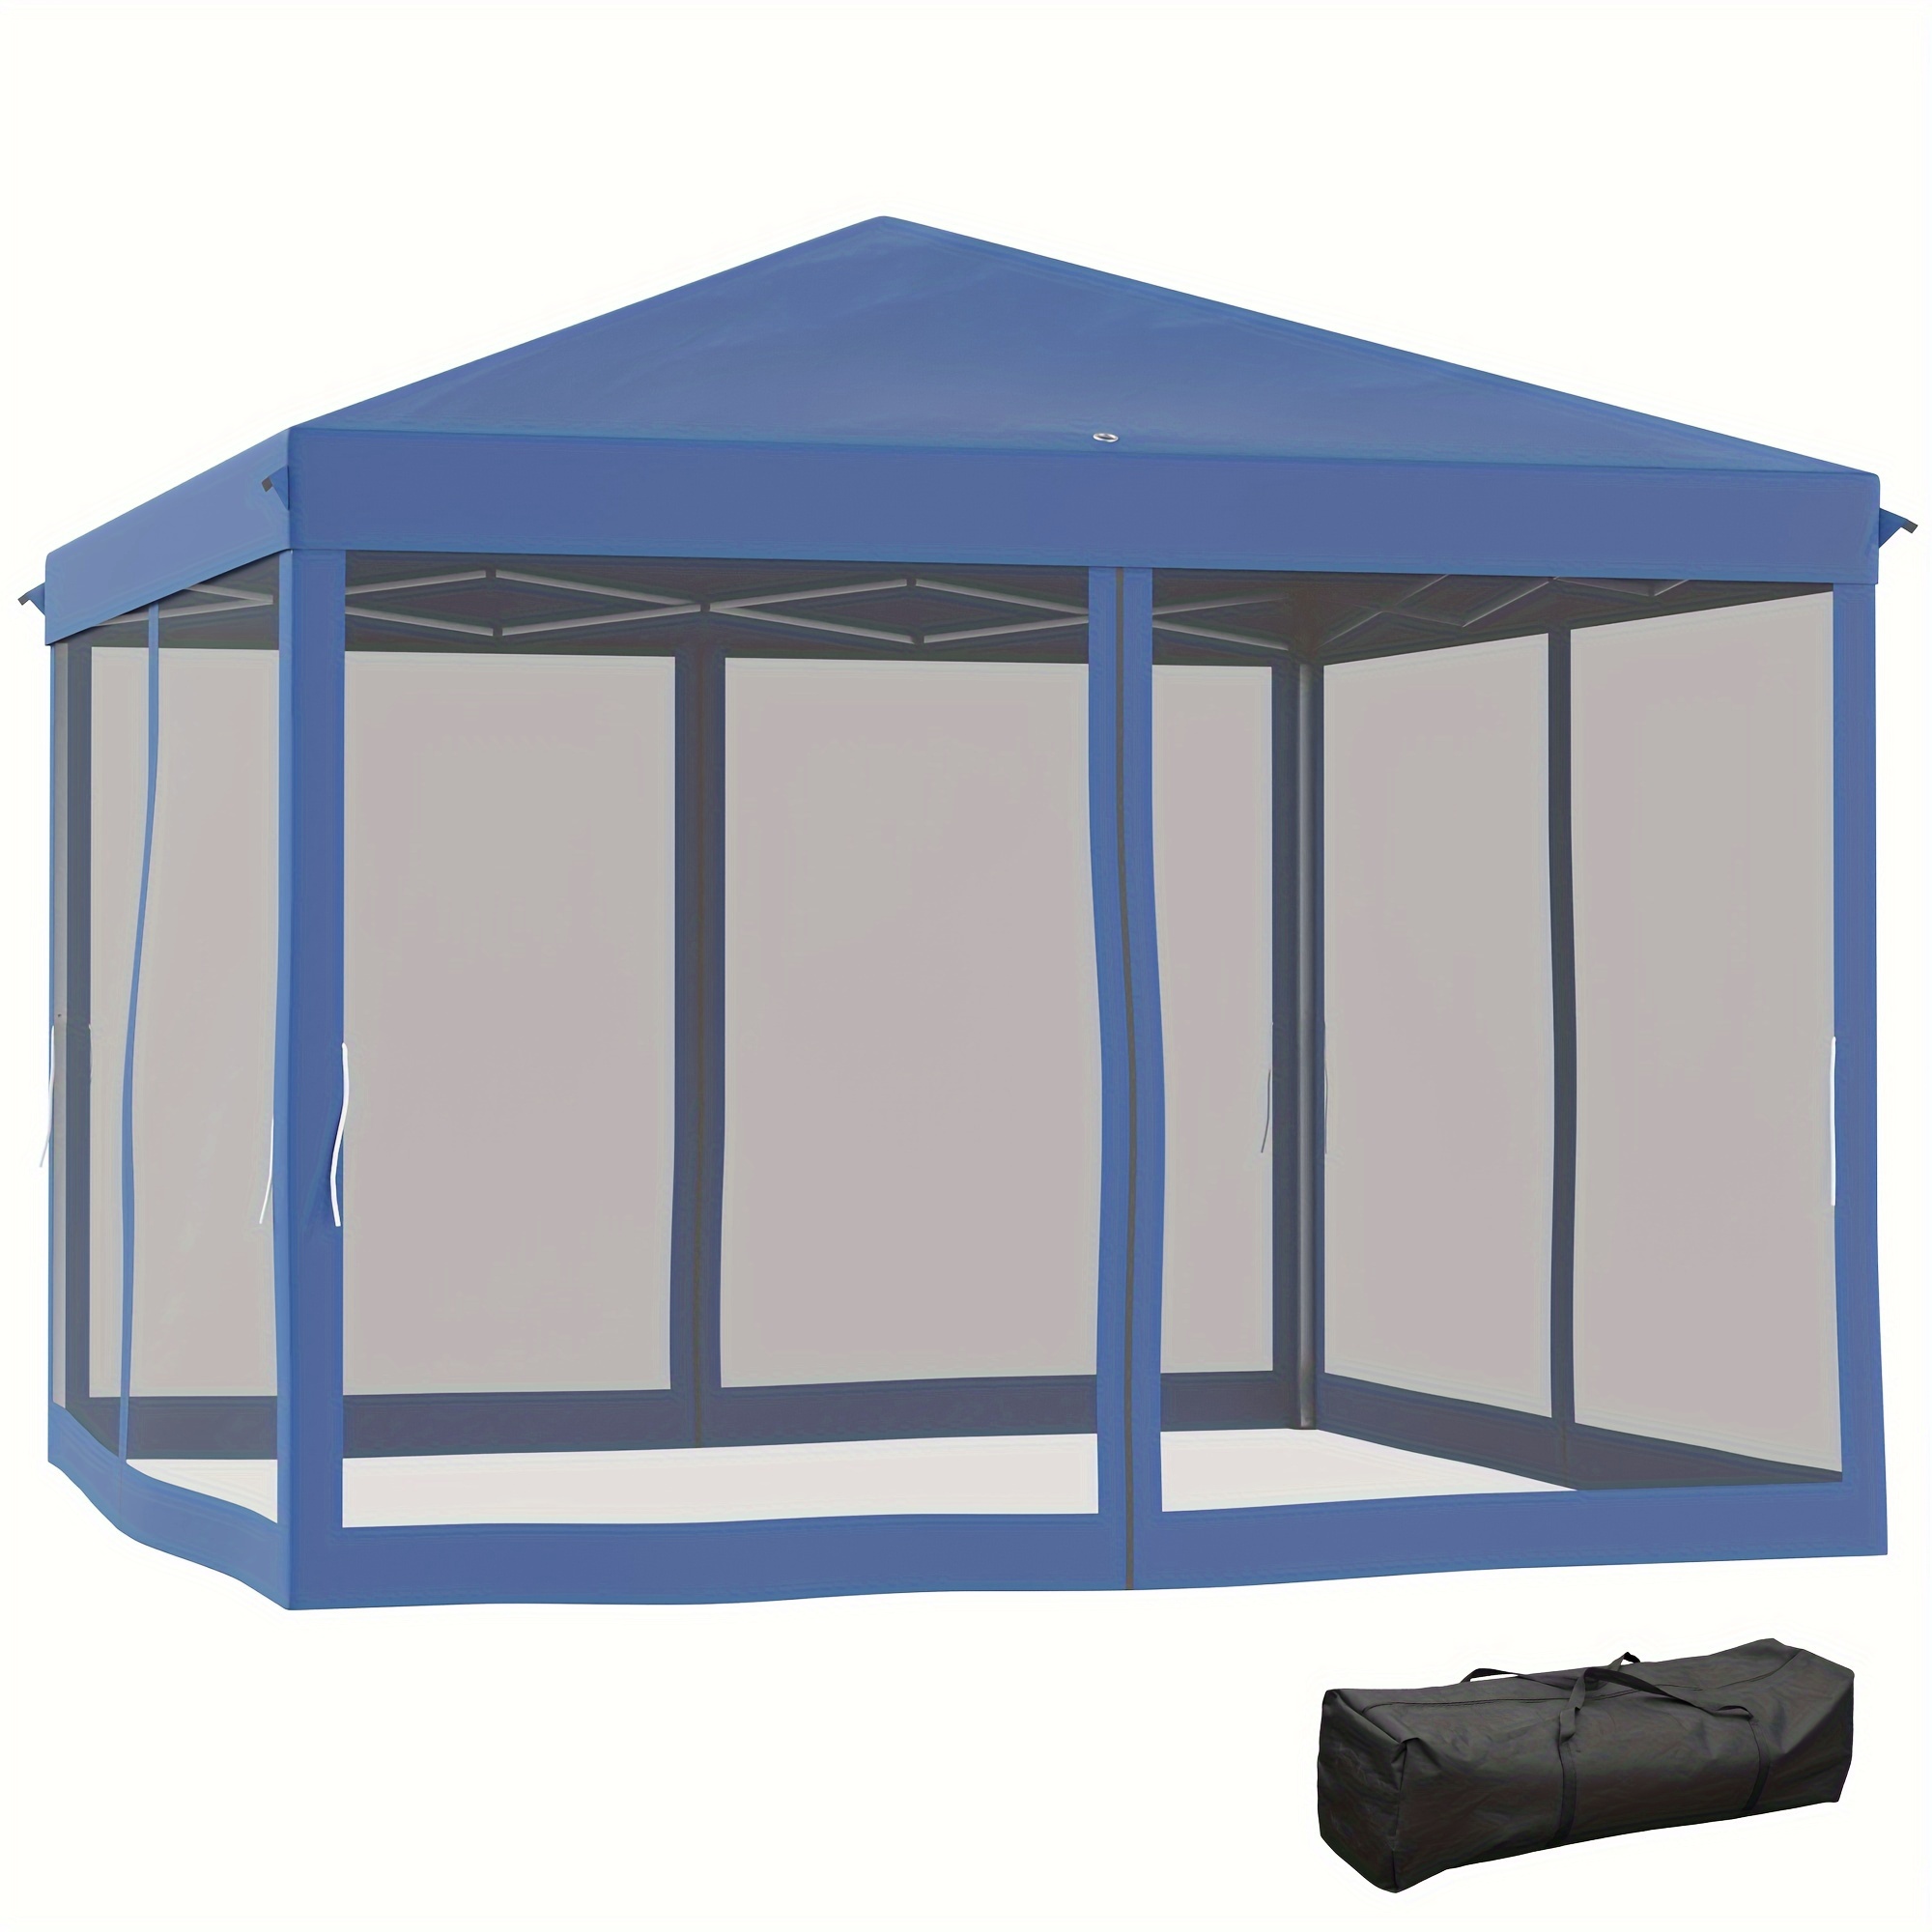 

10' X 10' Pop Up Canopy Tent With Netting, Instant Gazebo, Screen House Room With Carry Bag, Height Adjustable, For Outdoor, Garden, Patio, Camping, Blue